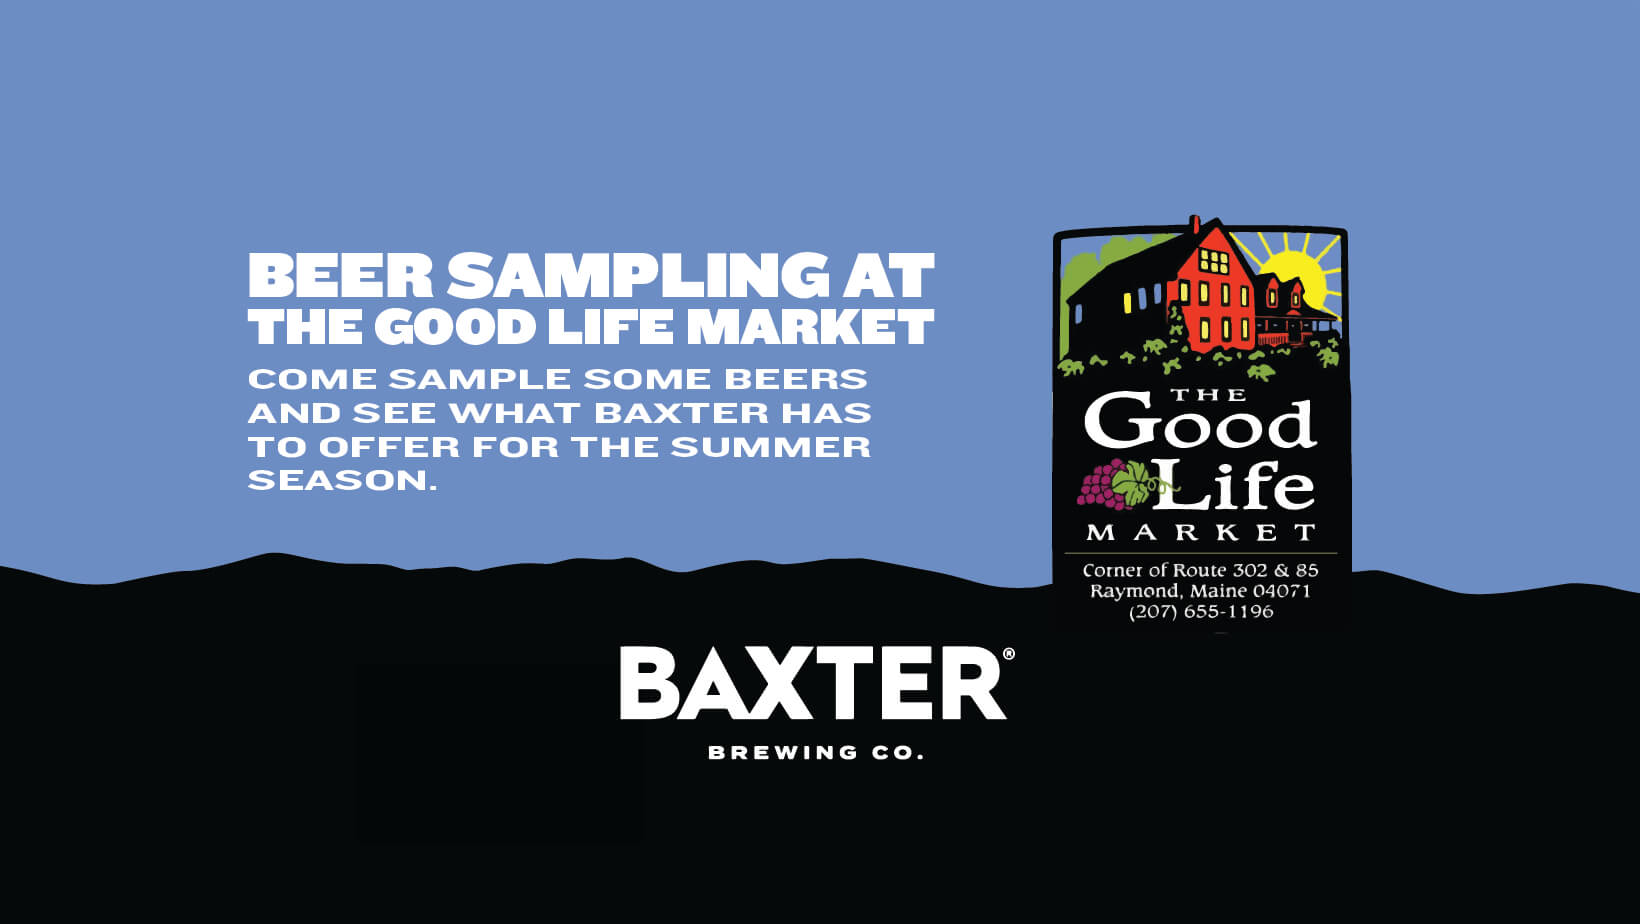 image promoting a tasting event on June 14th at The Good Life Market